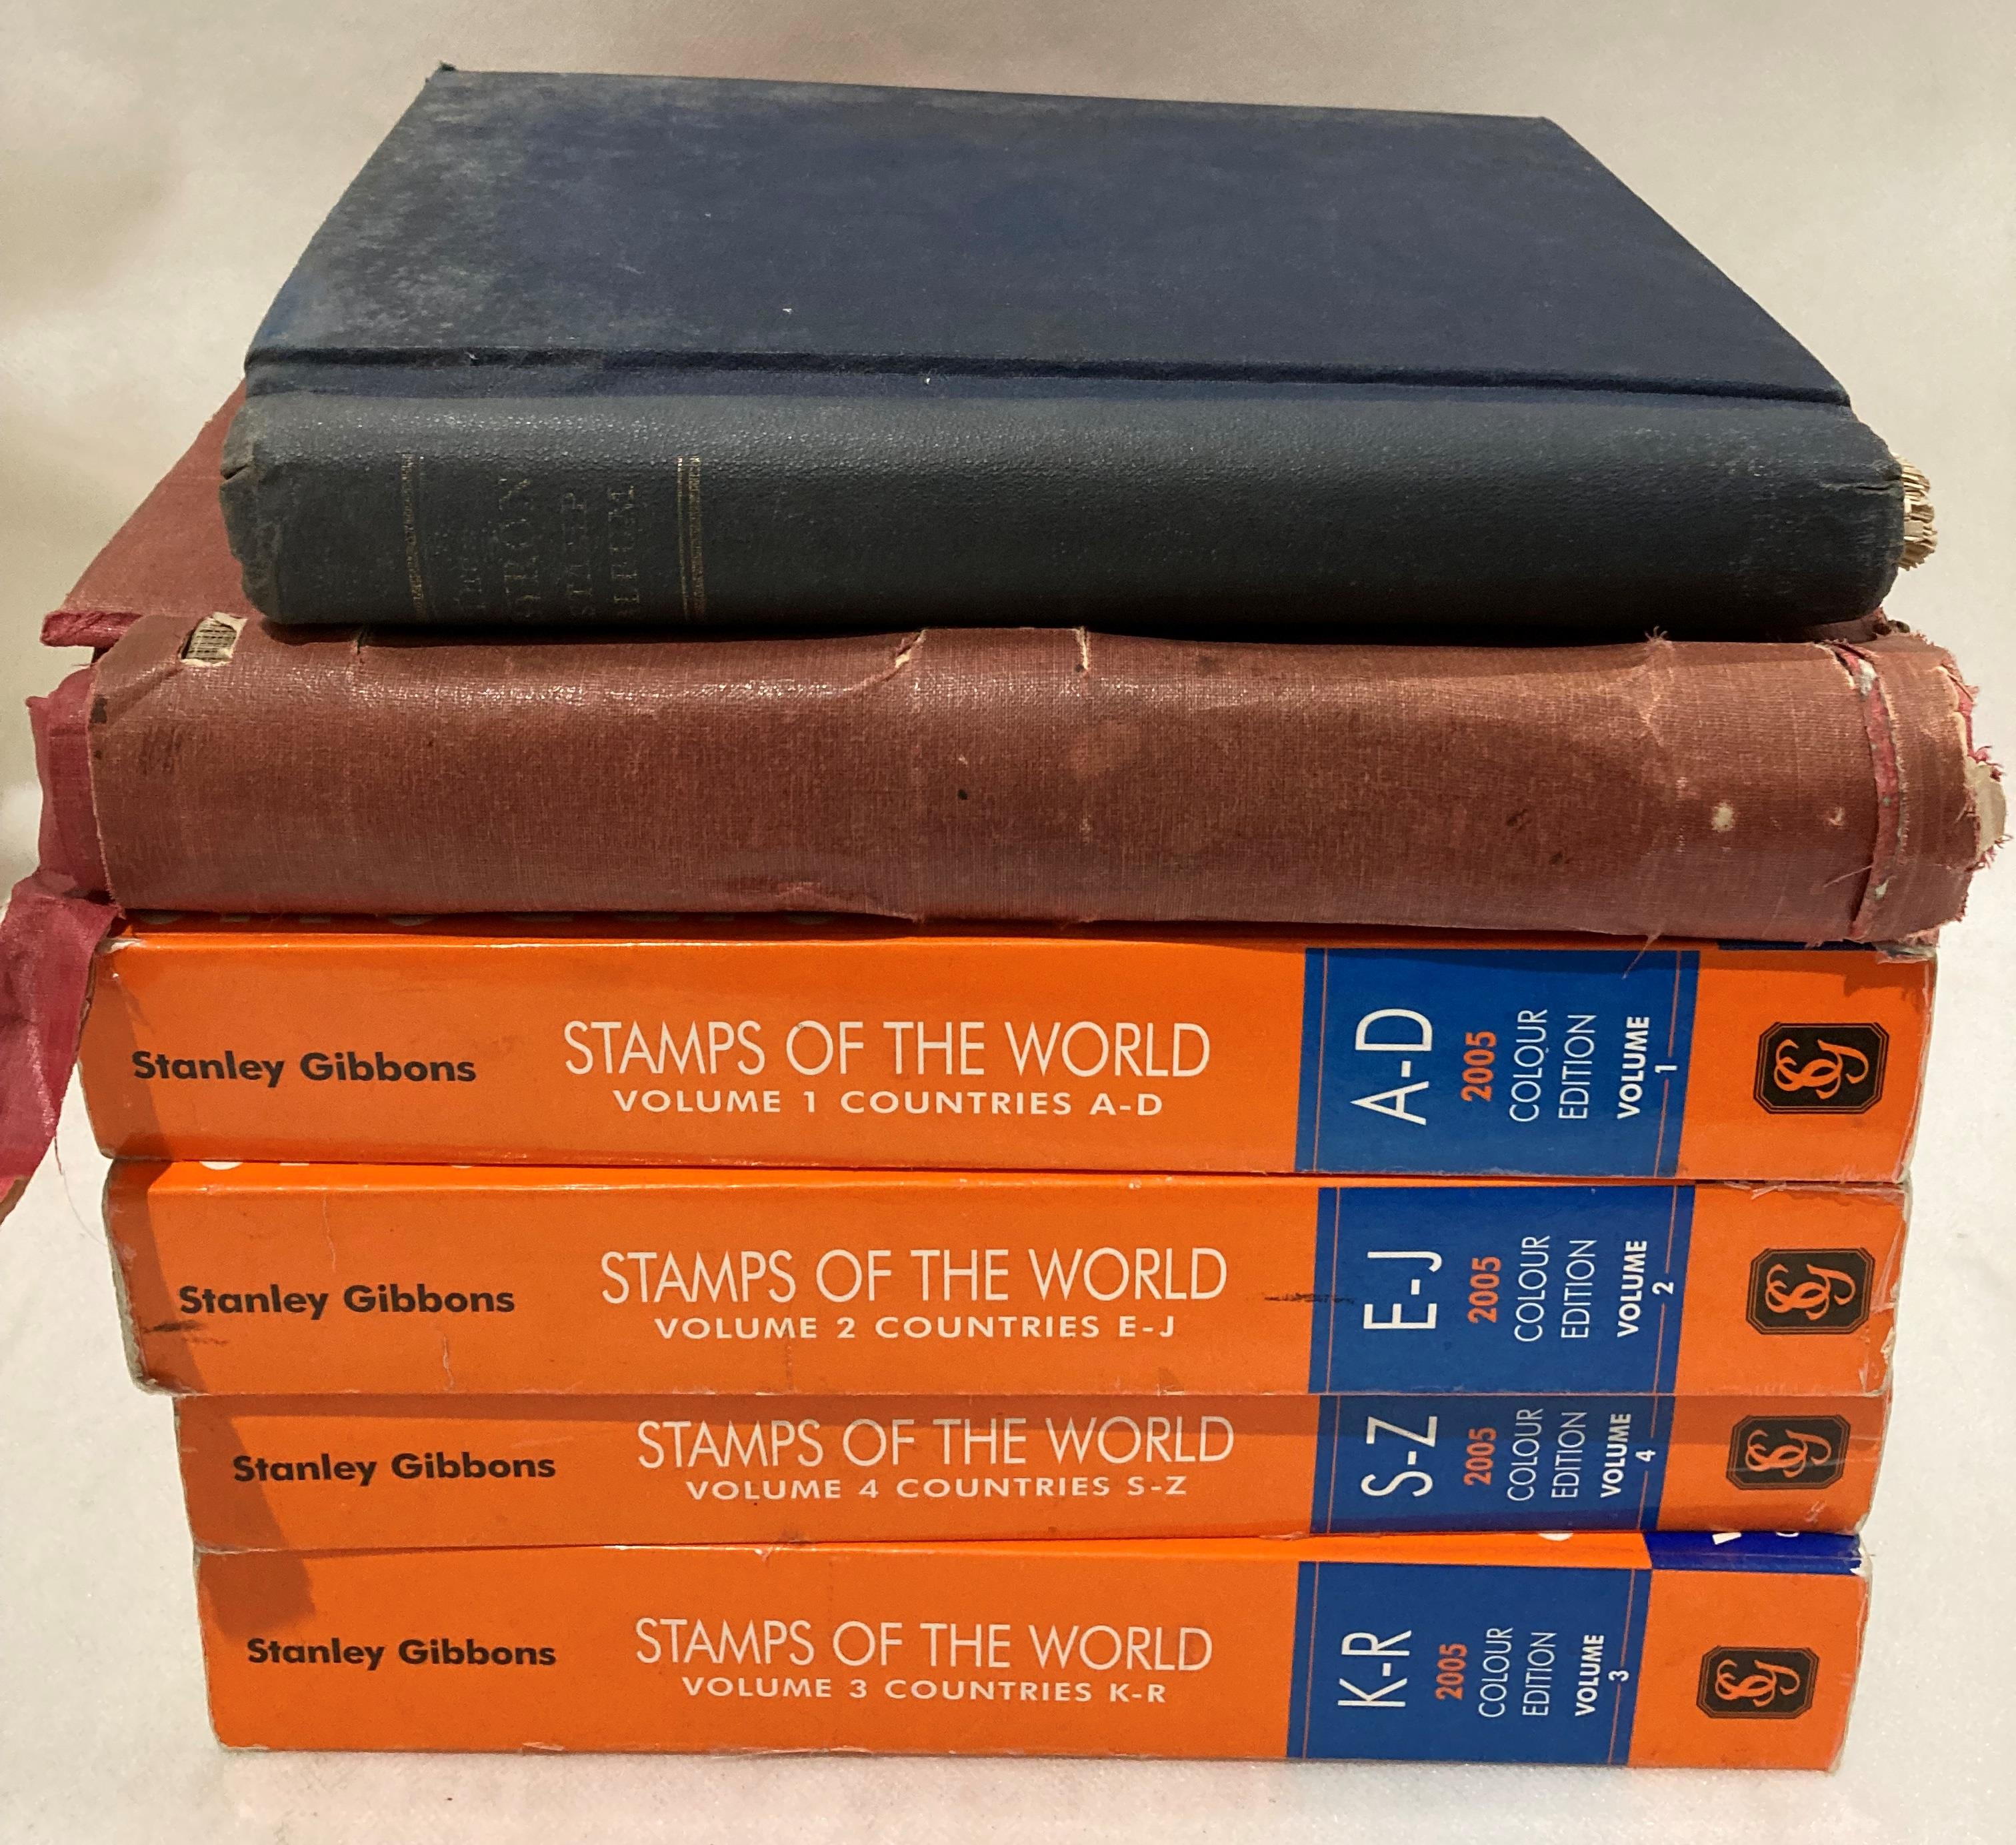 Two stamp albums/stock books containing British/Commonwealth/World Stamps and four volumes of